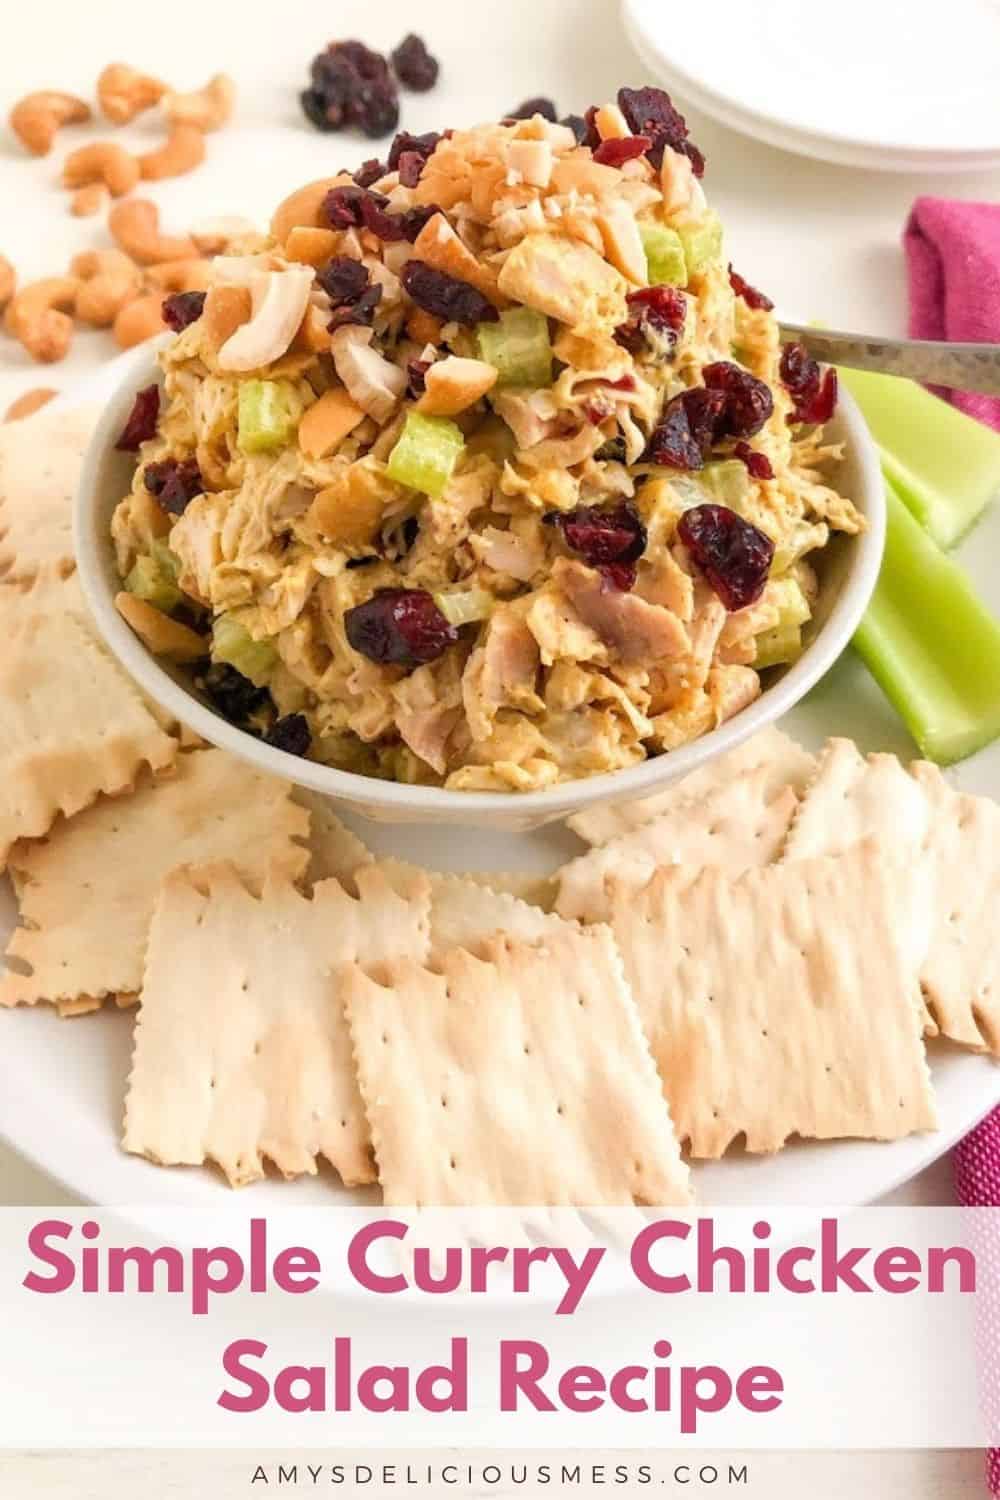 Medium white round plate with plain crackers and celery sticks with small bowl of chicken salad in the middle. Extra cranberries and cashews on top of the chicken salad with a small silver cocktail spoon. Additional whole cashews and dried cranberries in the background with small round white plates and pink kitchen towel.